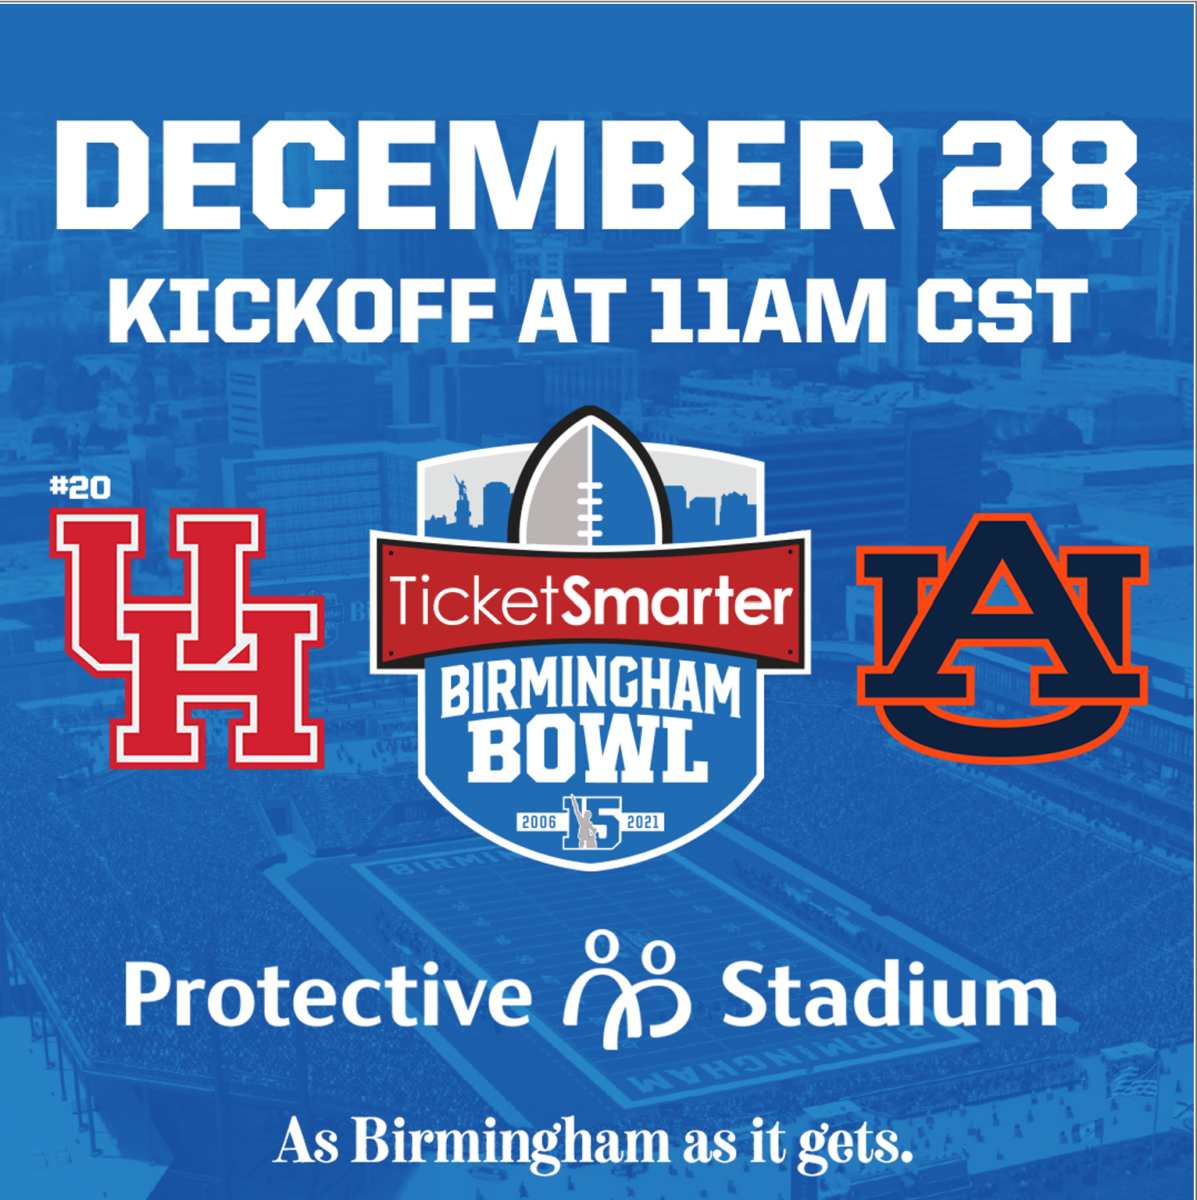 In town for the Birmingham Bowl? Here’s a guide to everything you need